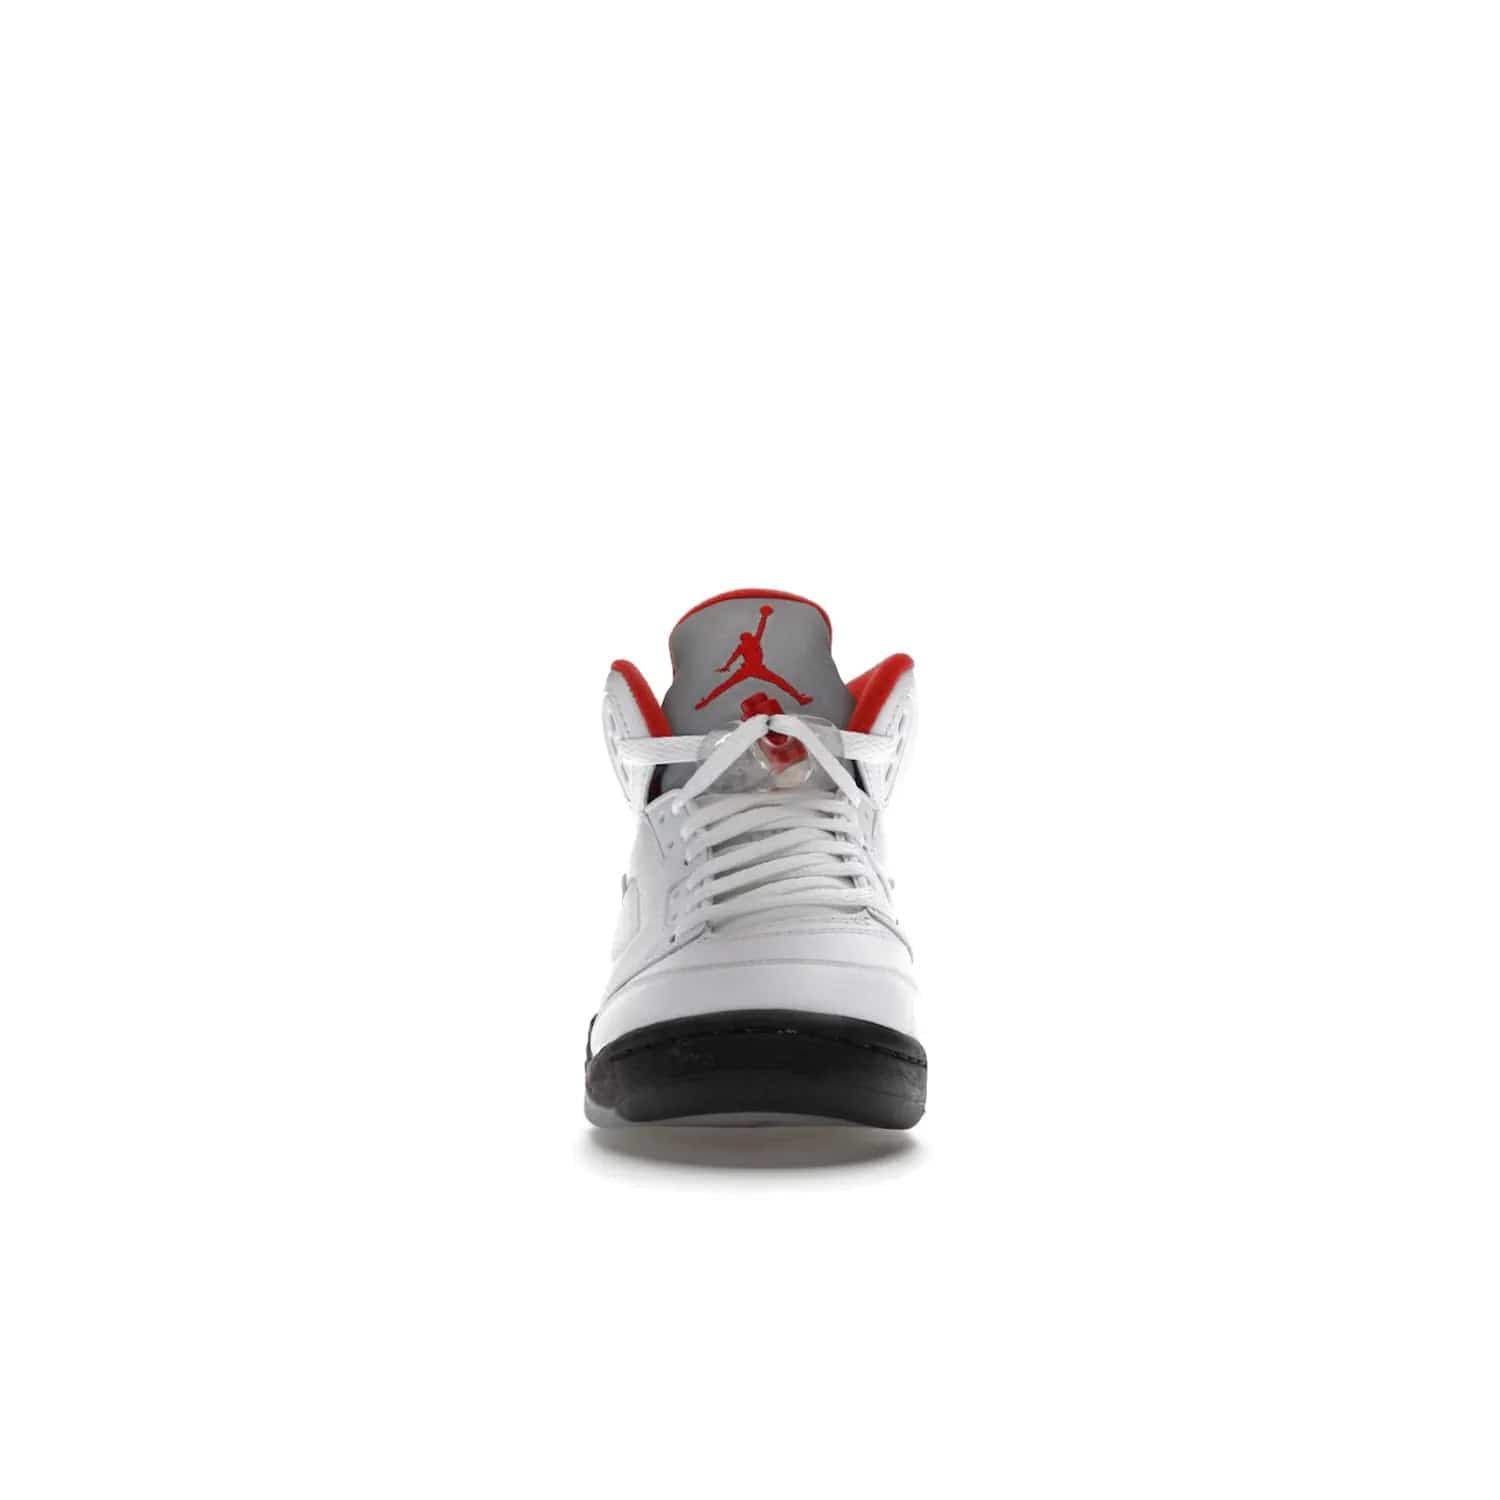 Jordan 5 Retro Fire Red Silver Tongue (2020) (GS) - Image 10 - Only at www.BallersClubKickz.com - A stylish option for any grade schooler. The Air Jordan 5 Retro Fire Red Silver Tongue 2020 GS features a combination of four hues, premium white leather, a clear mesh mid-upper and a reflective silver tongue. An icy translucent blue outsole completes the look. Available on May 2, $150.